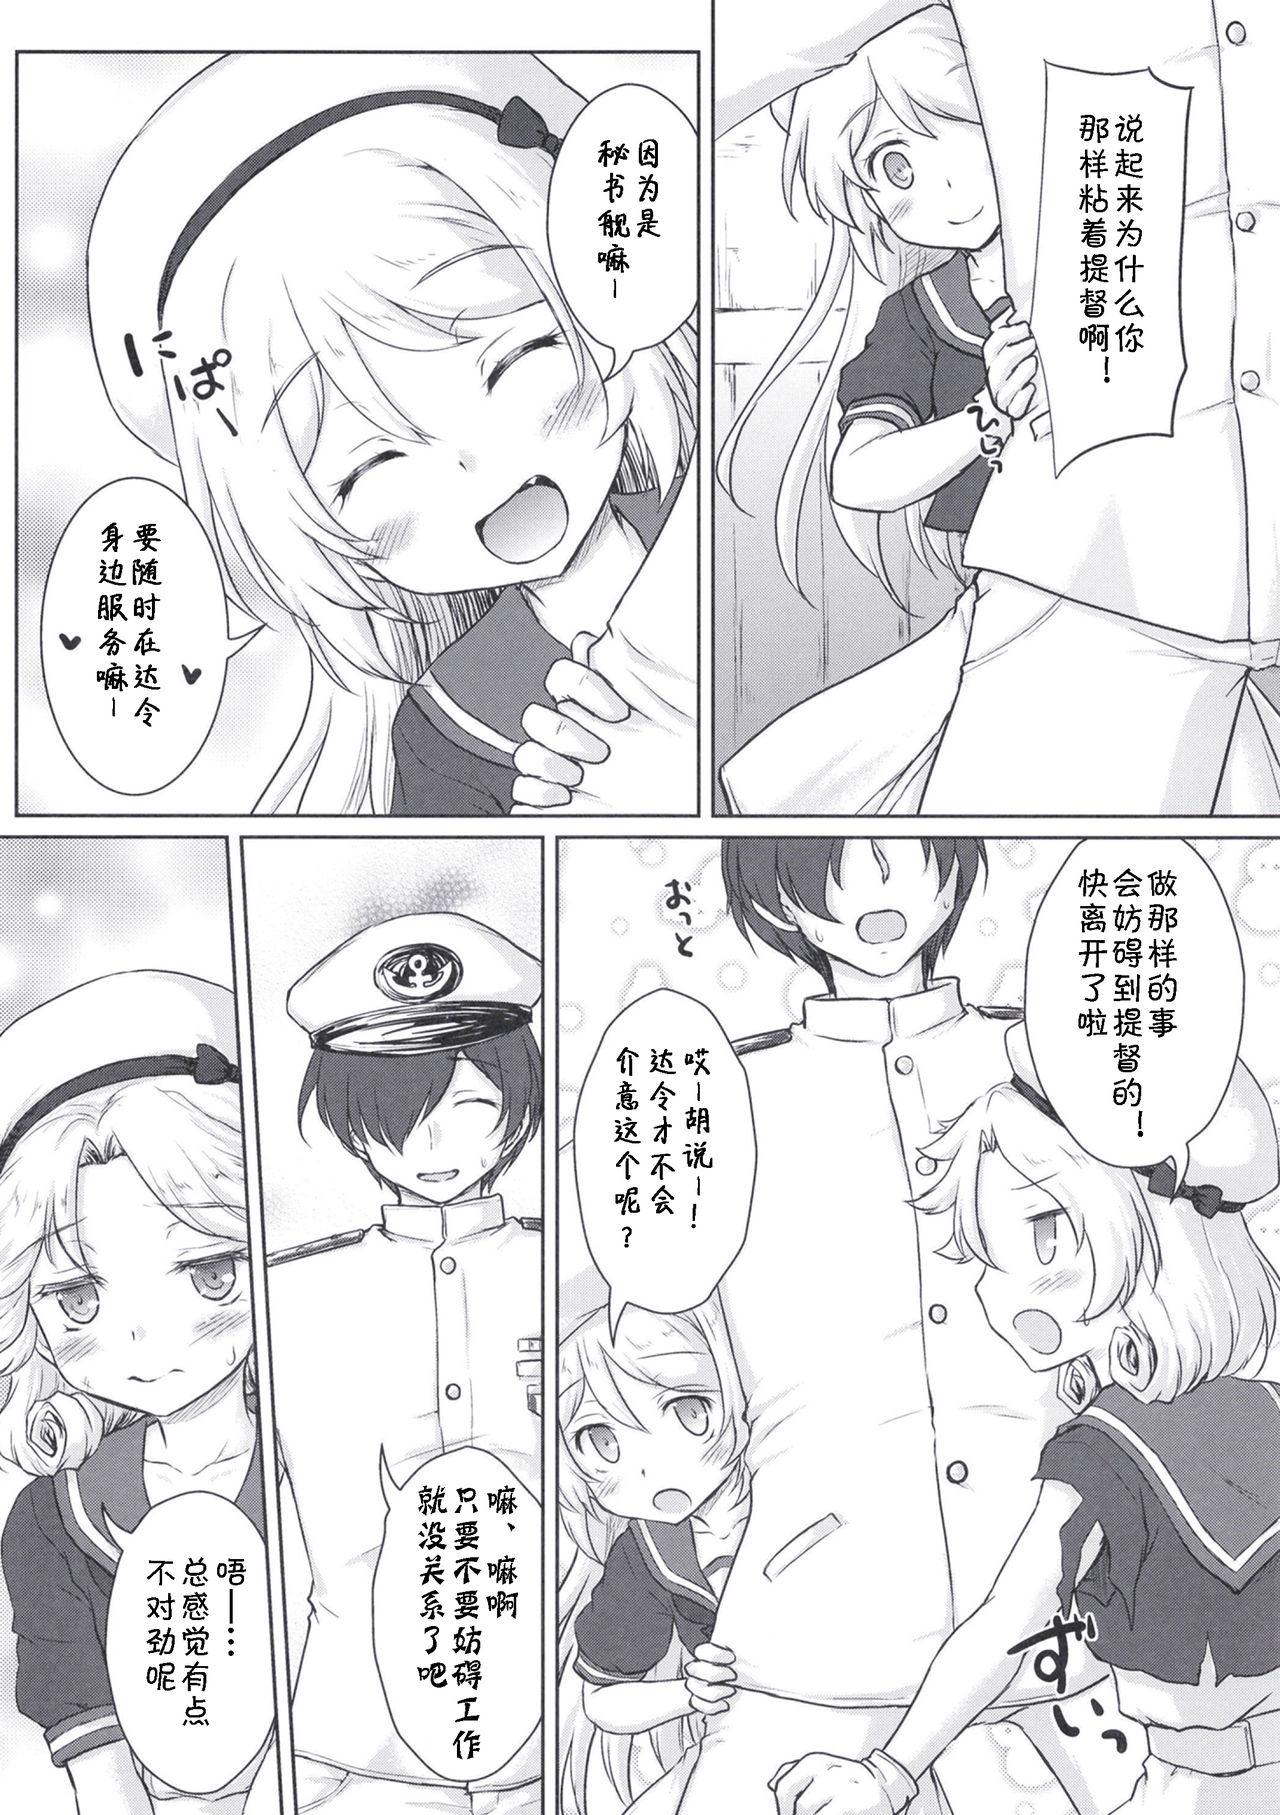 Erotic Darling is in sight! act2 - Kantai collection Footjob - Page 7